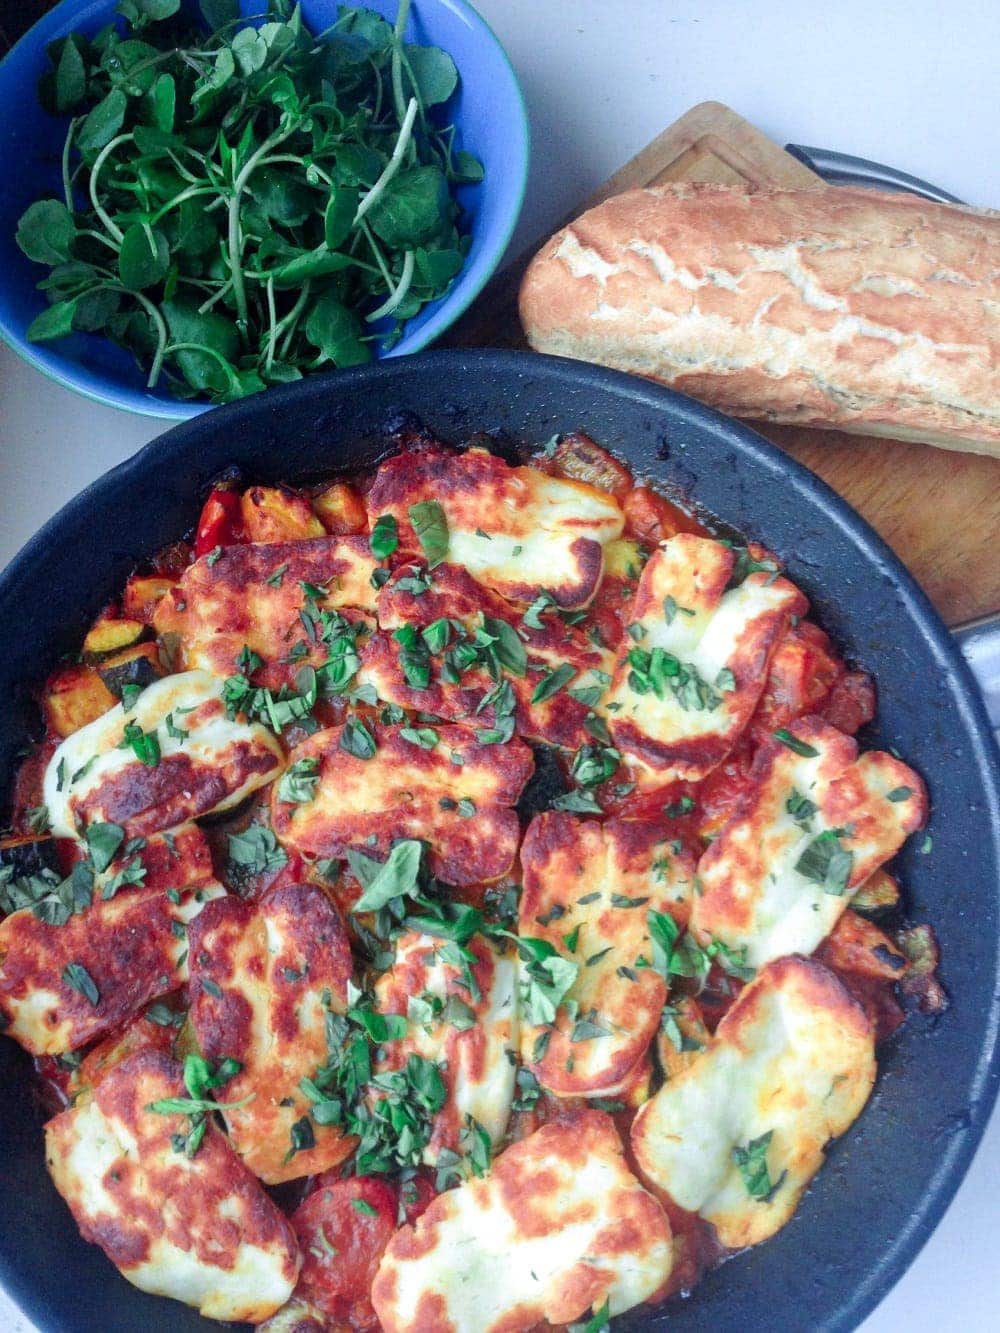 This halloumi bake perfectly combines the healthy freshness of vegetables with the chewy, salty halloumi for a delicious vegetarian dinner.